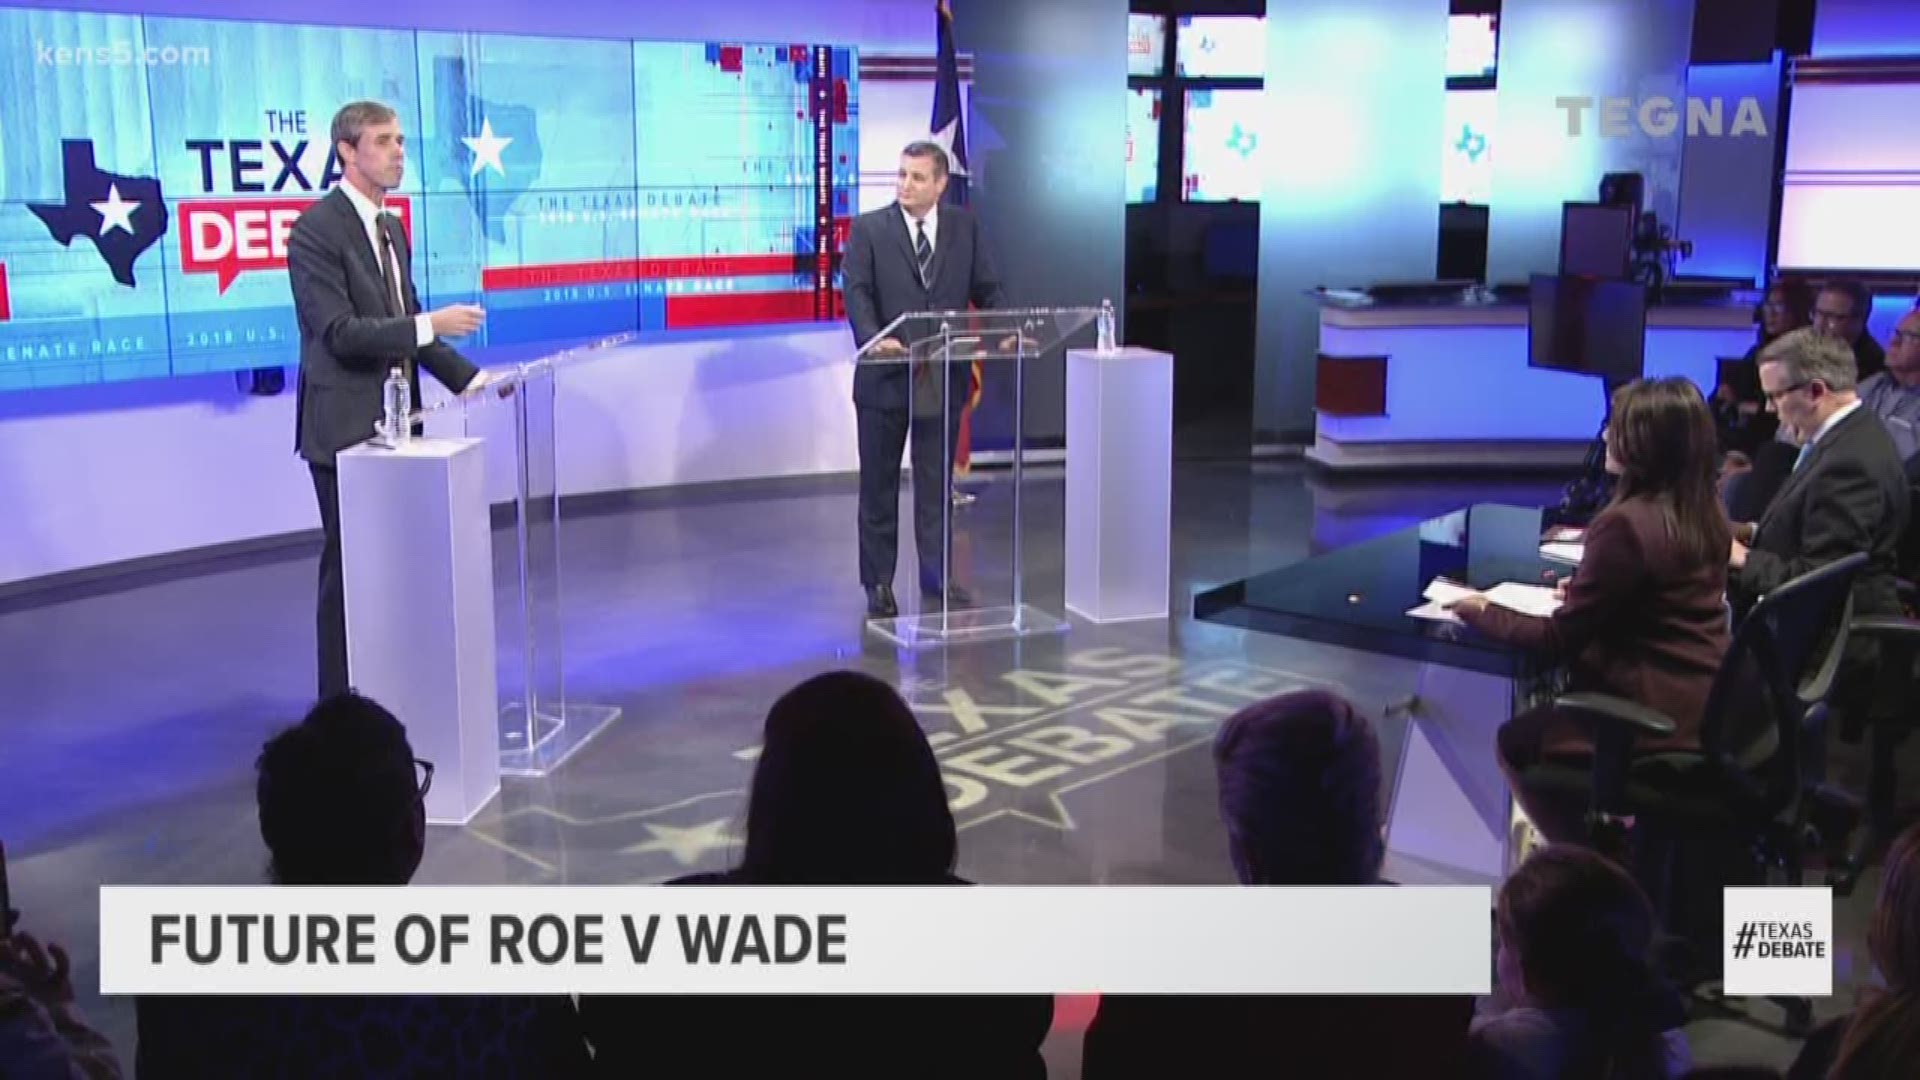 The candidates discuss the future of important cases in the Supreme Court, such as the historic case on abortion laws.